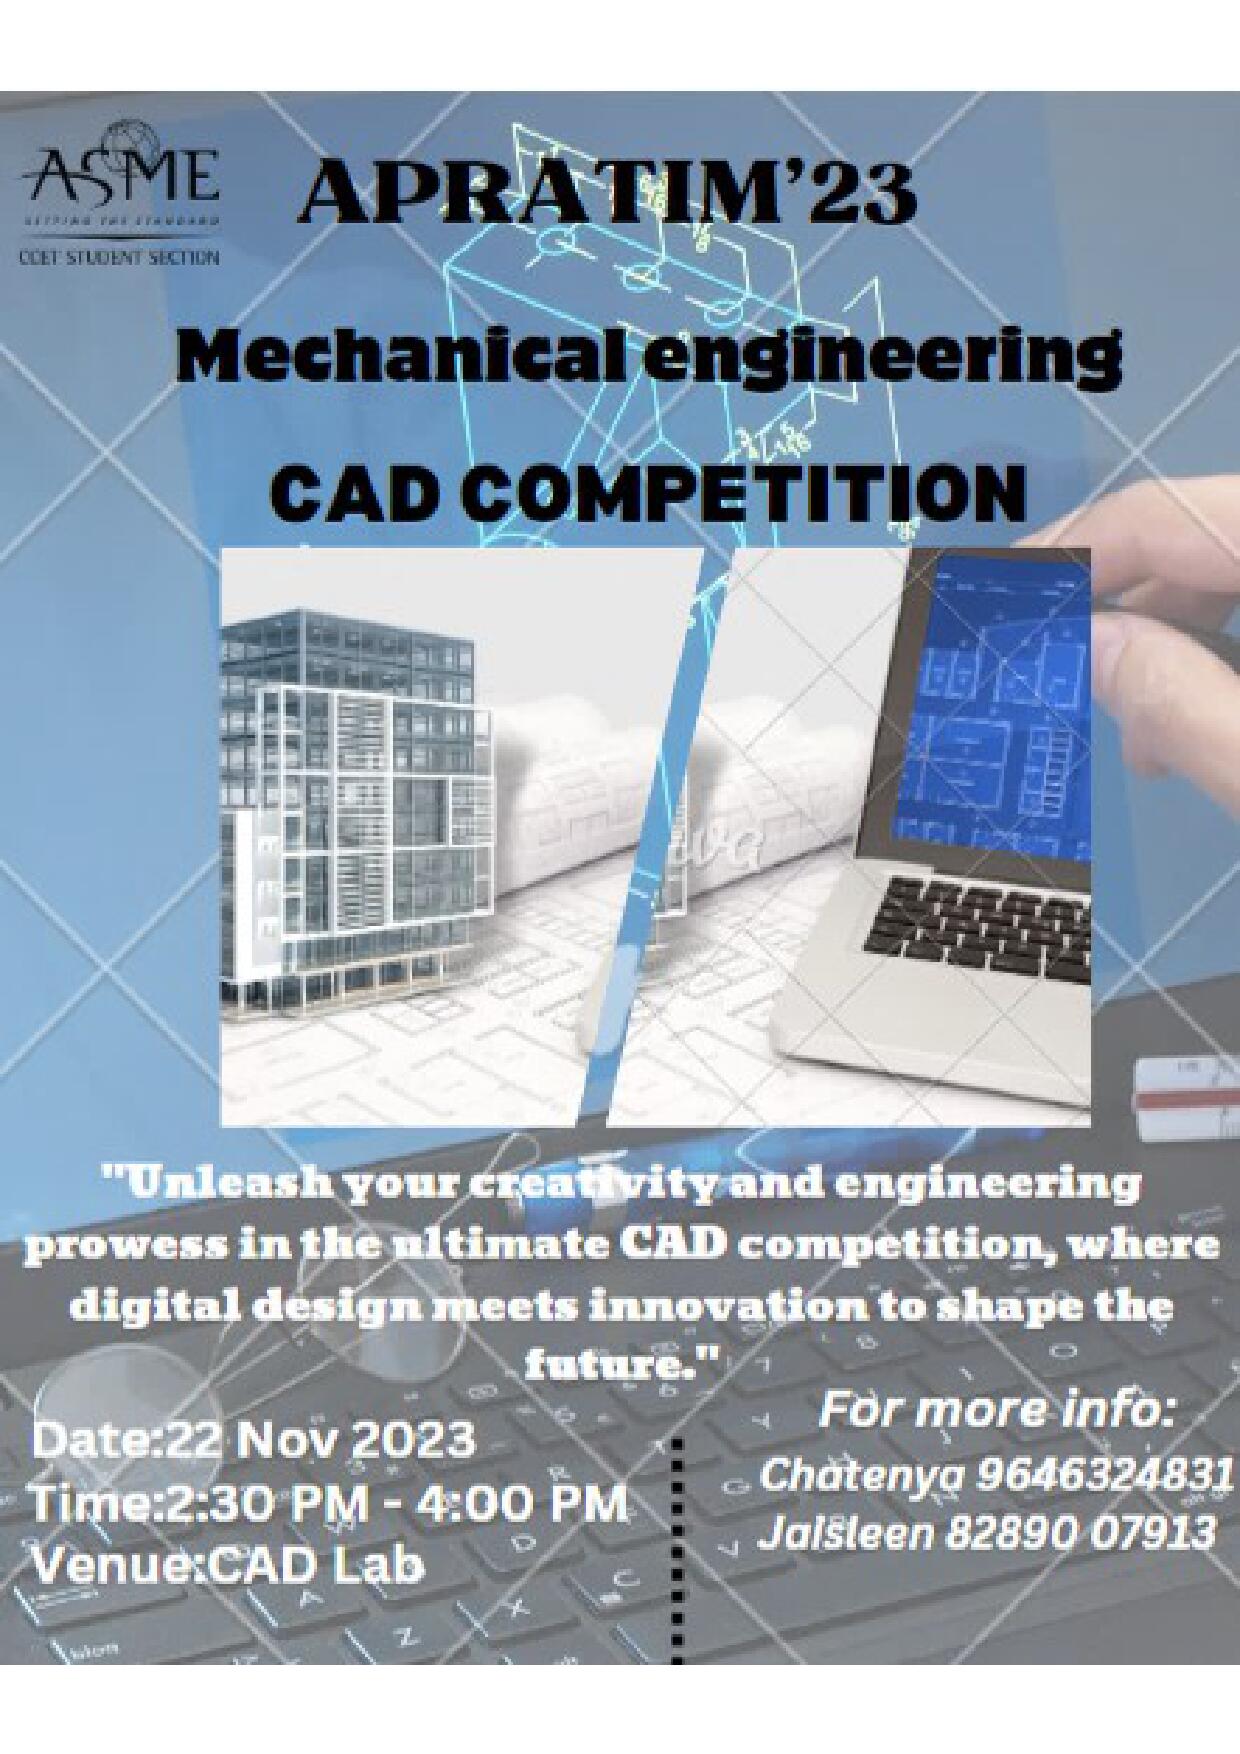 CAD competition